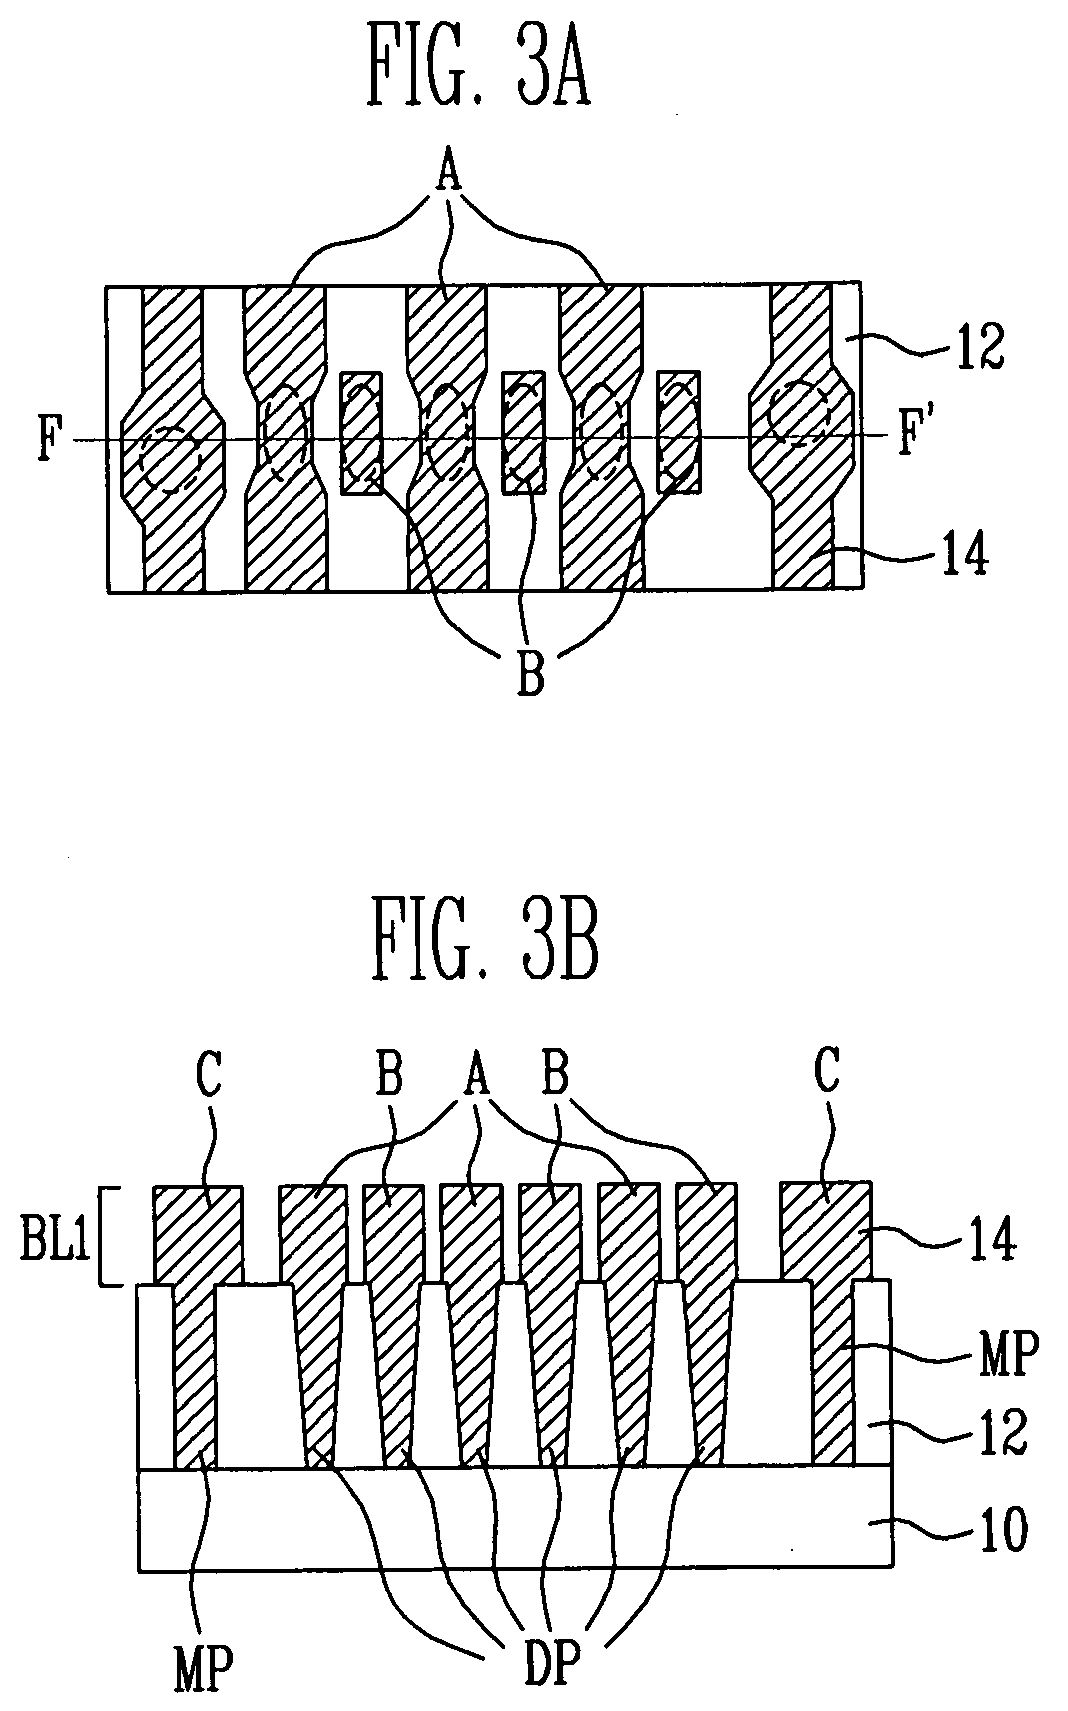 Method of forming bit line of flash memory device